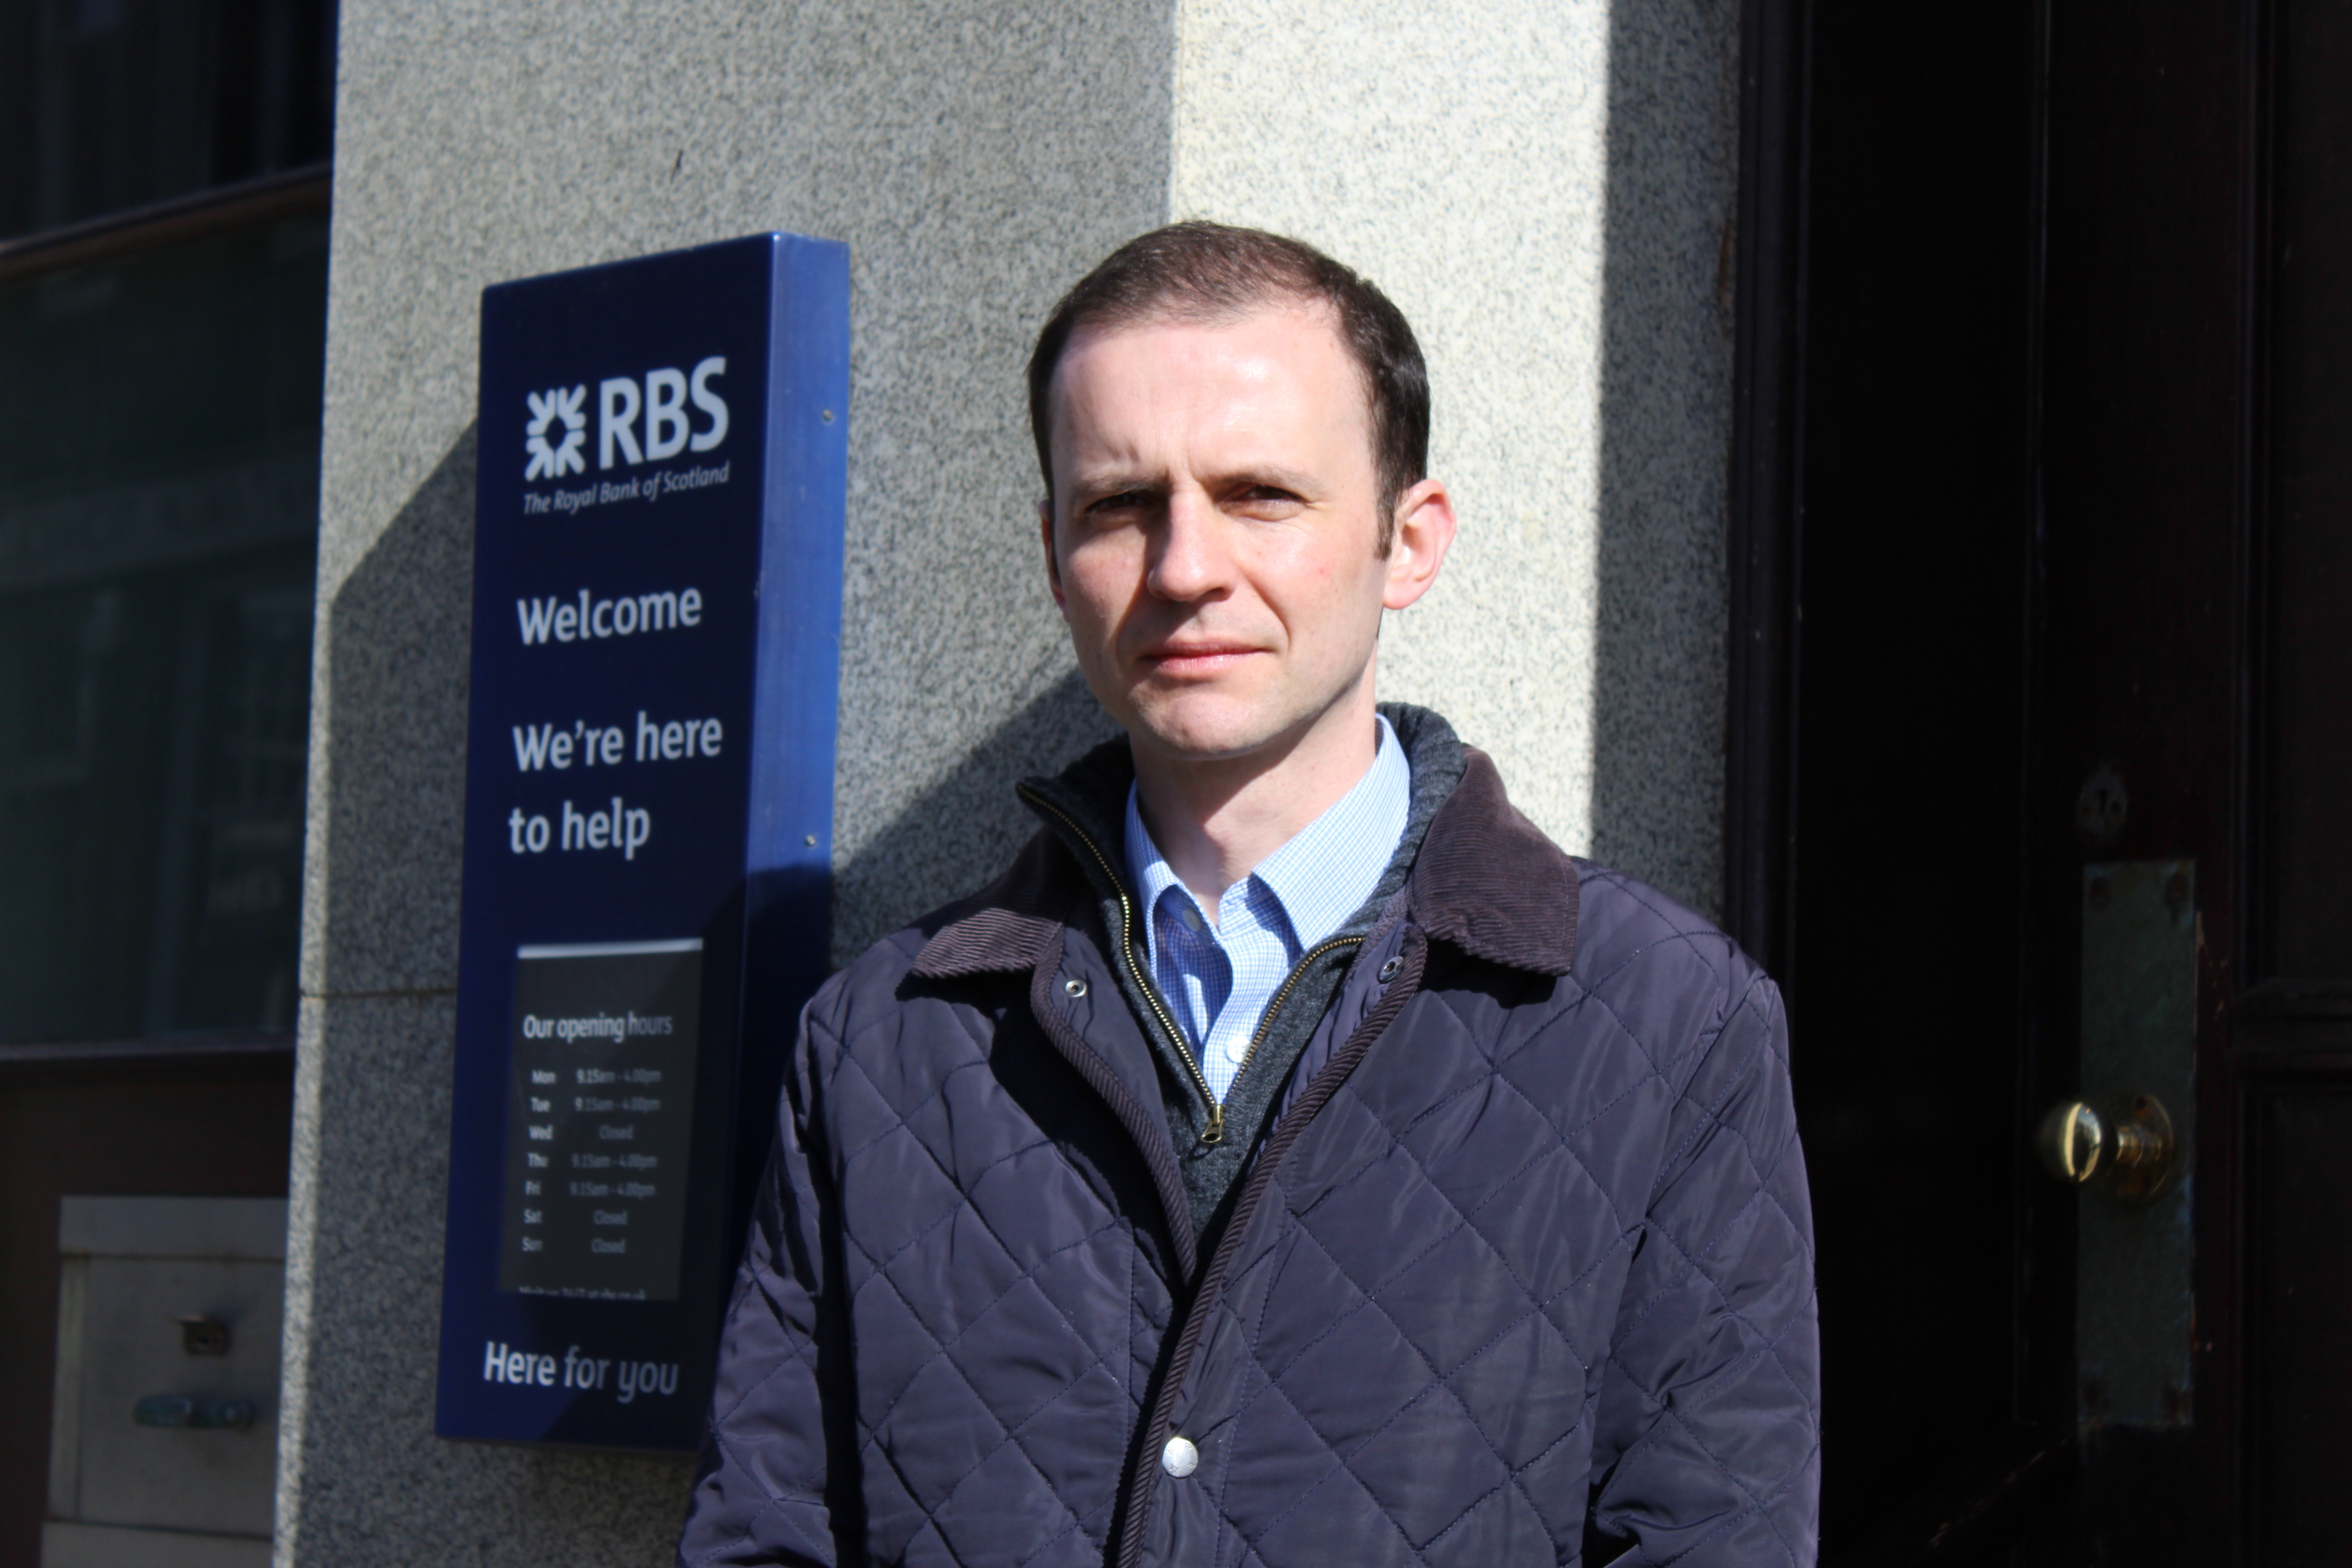 Stephen Gethins outside the Anstruther branch of RBS.